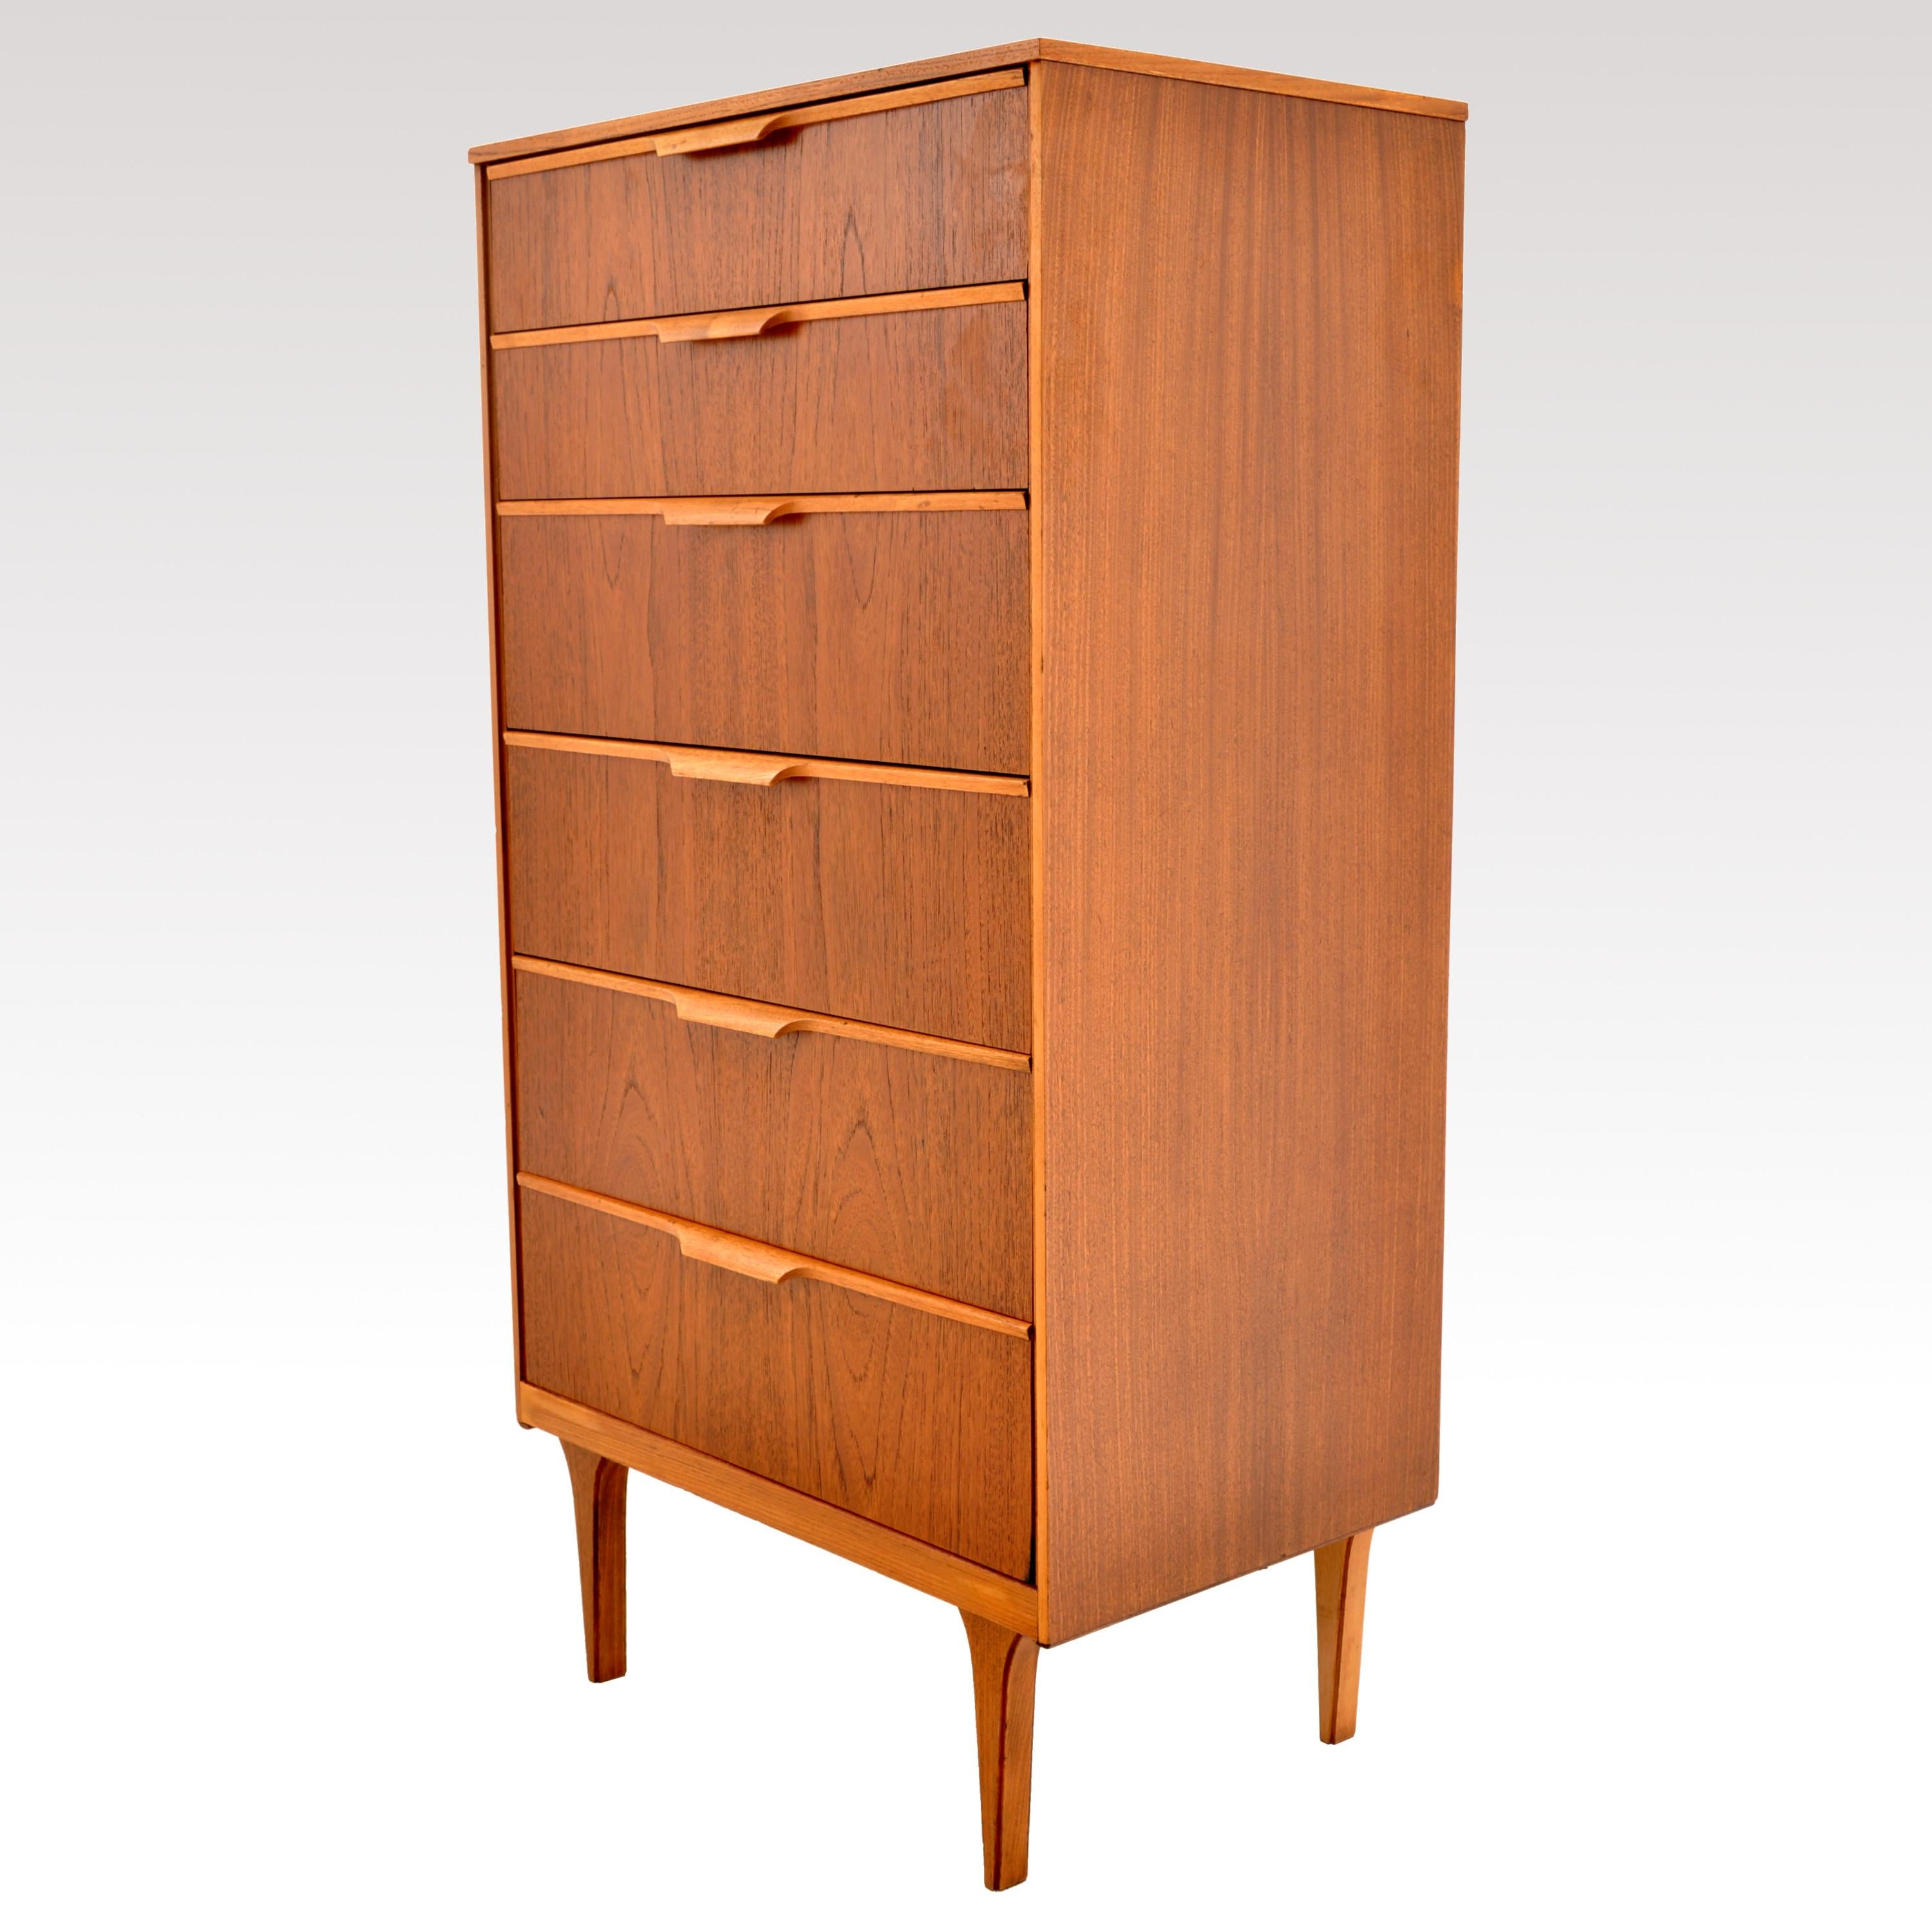 The dresser having six graduated drawers with turned pulls and standing on tapering legs.